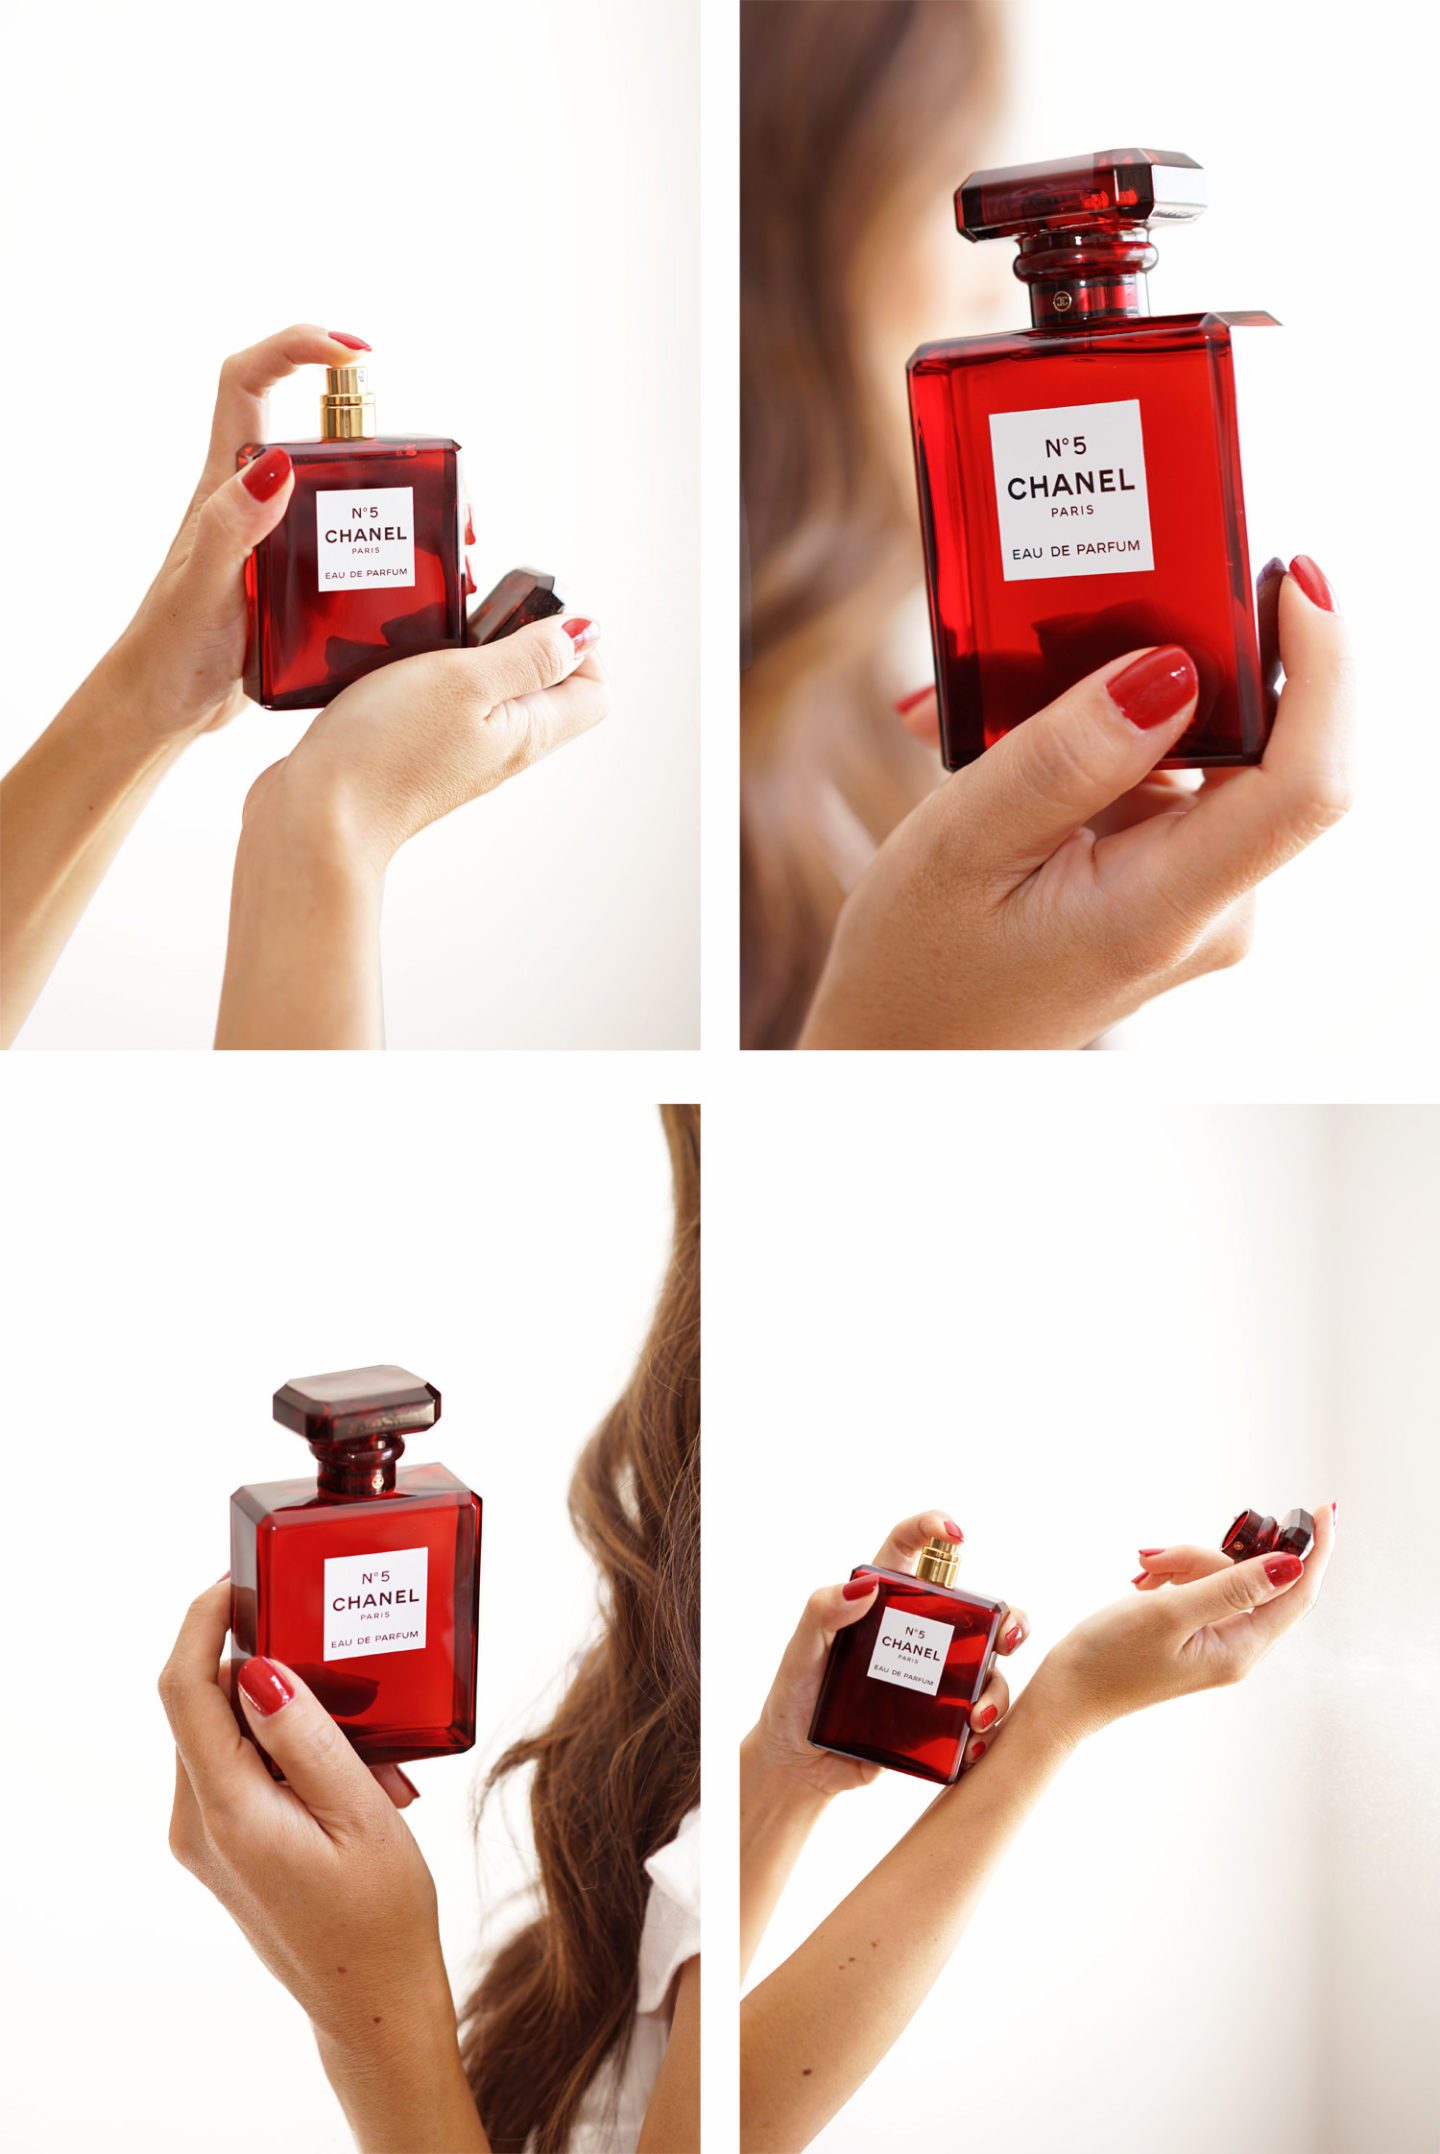 Chanel No 5 Red Holiday Eau de Parfum - Limited-Edition via The Beauty Look Book